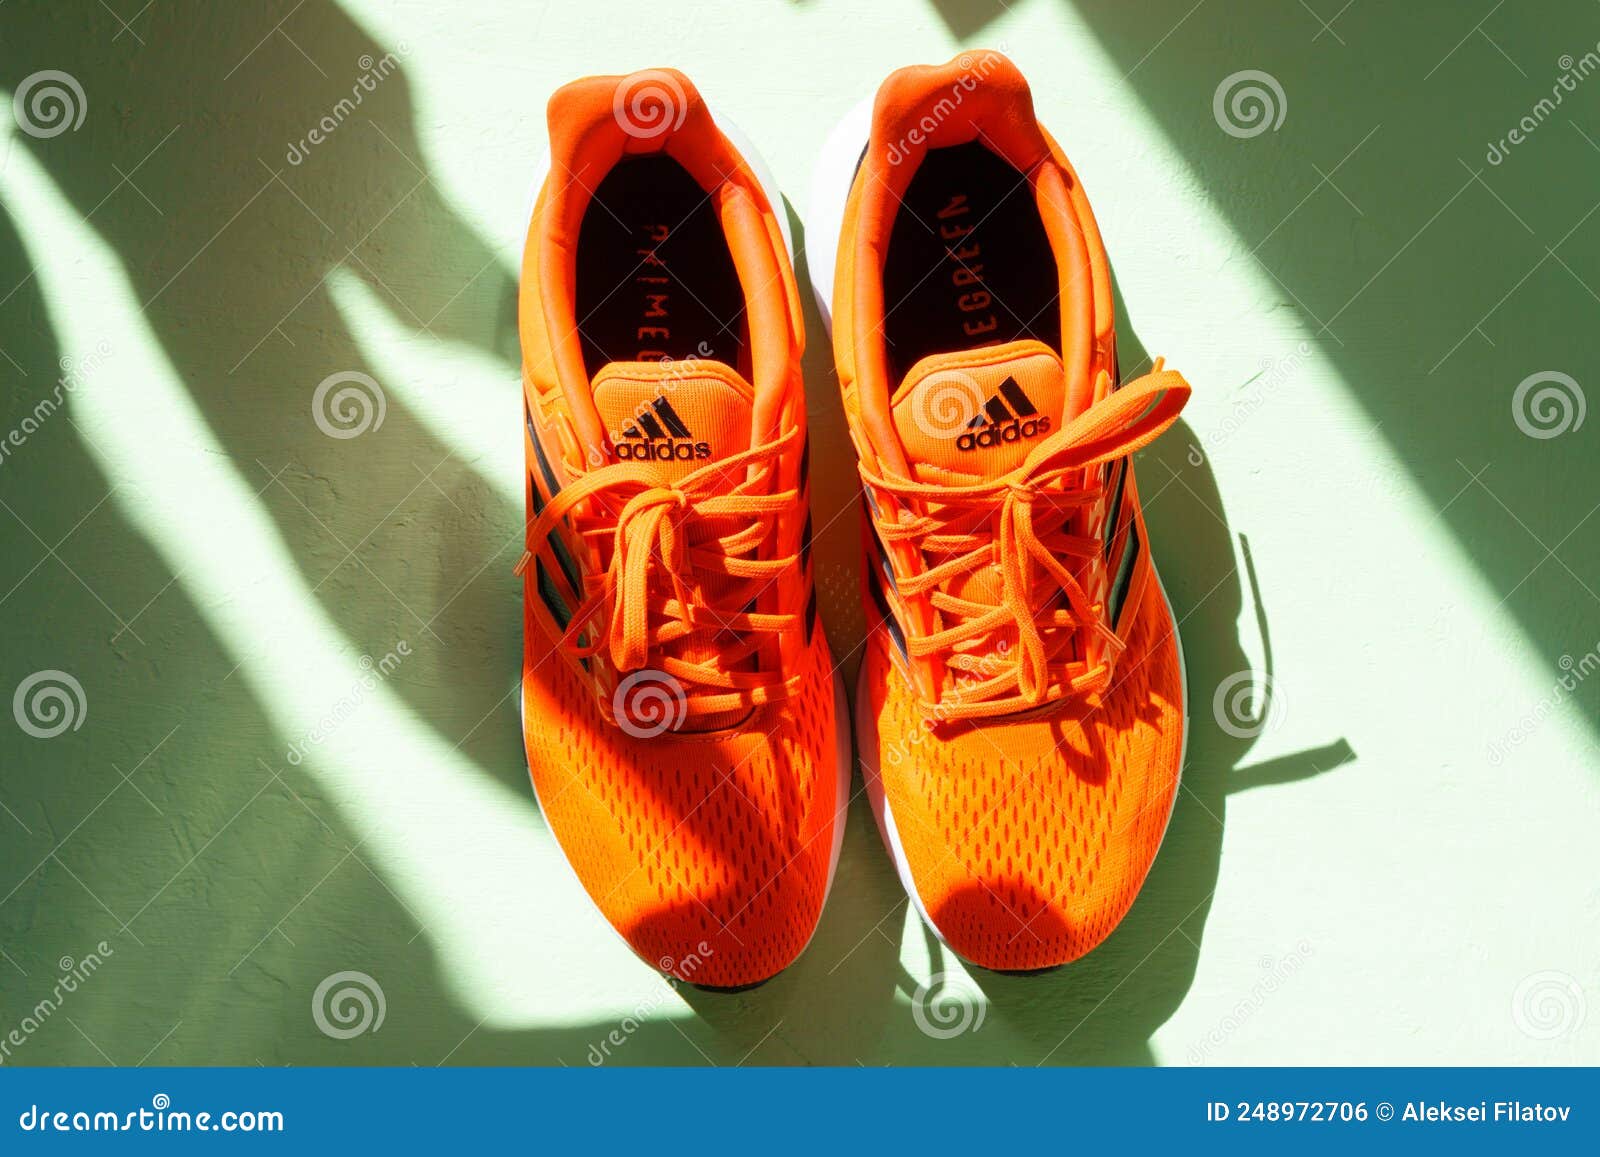 Tyumen, Russia-June 1, 2022: Adidas Logo and Shoes. Adidas is a German ...